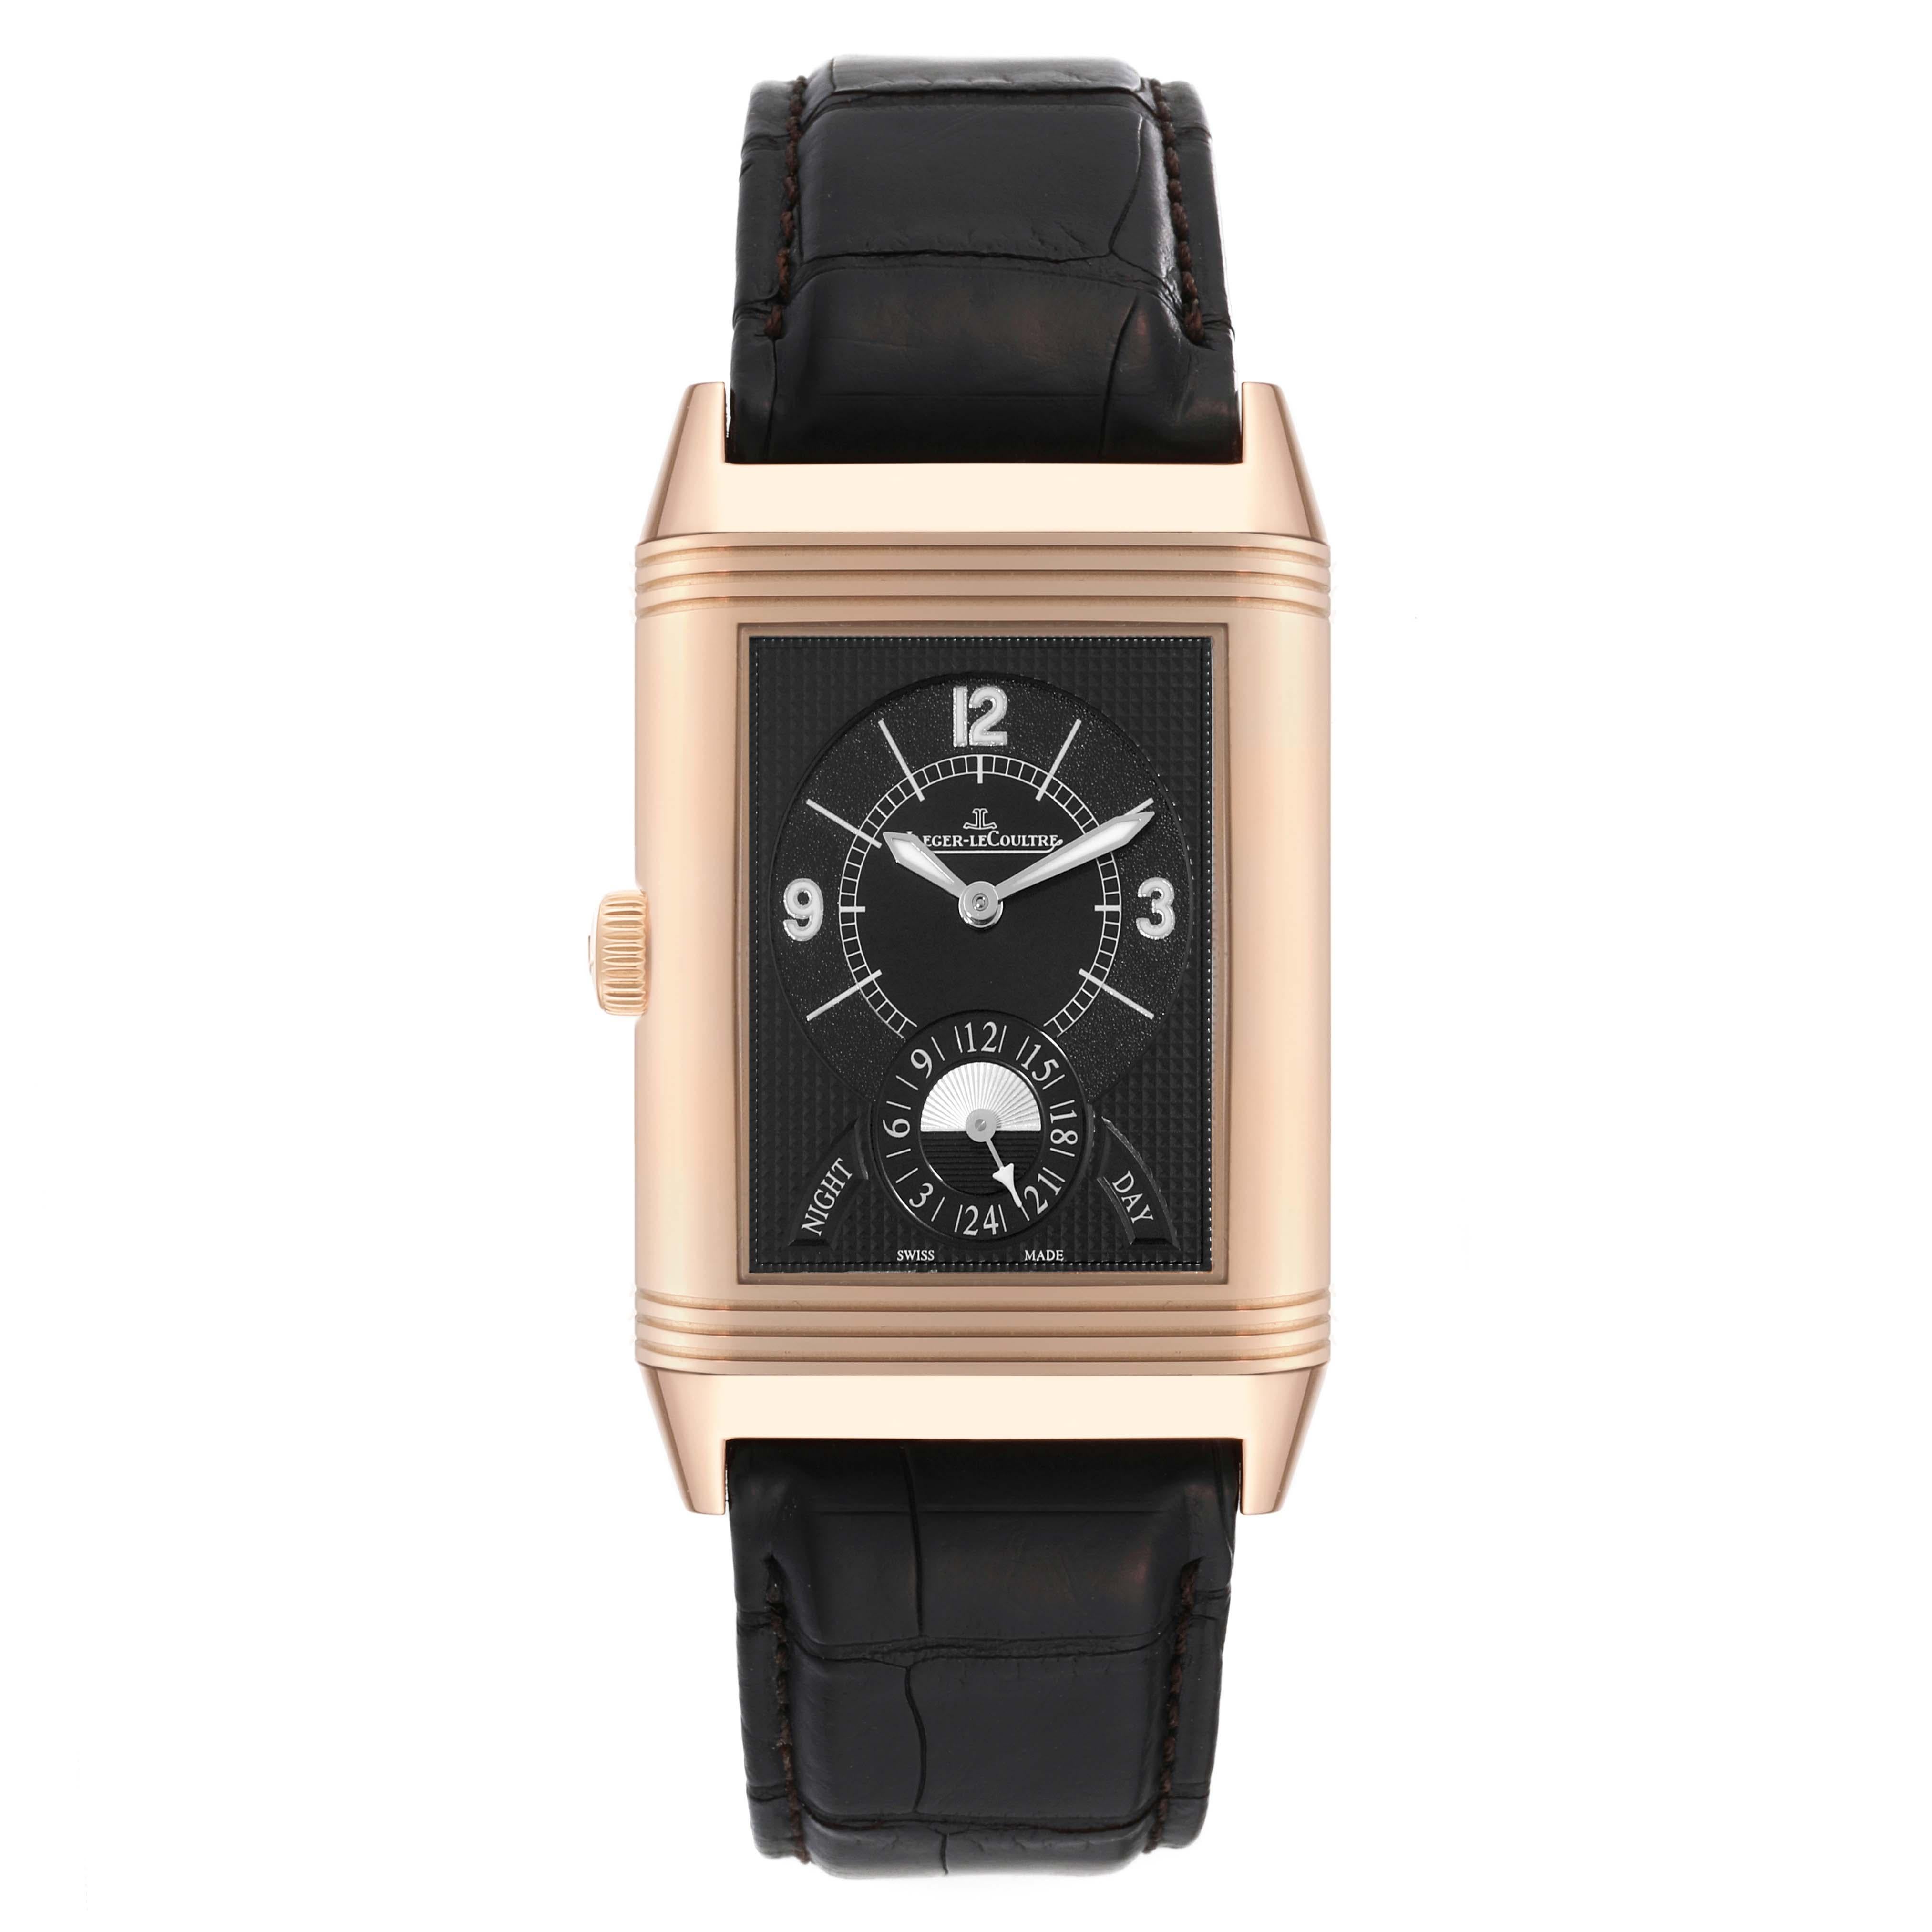 Jaeger LeCoultre Grande Reverse Rose Gold Mens Watch 273.2.85 Q3742421 In Excellent Condition For Sale In Atlanta, GA